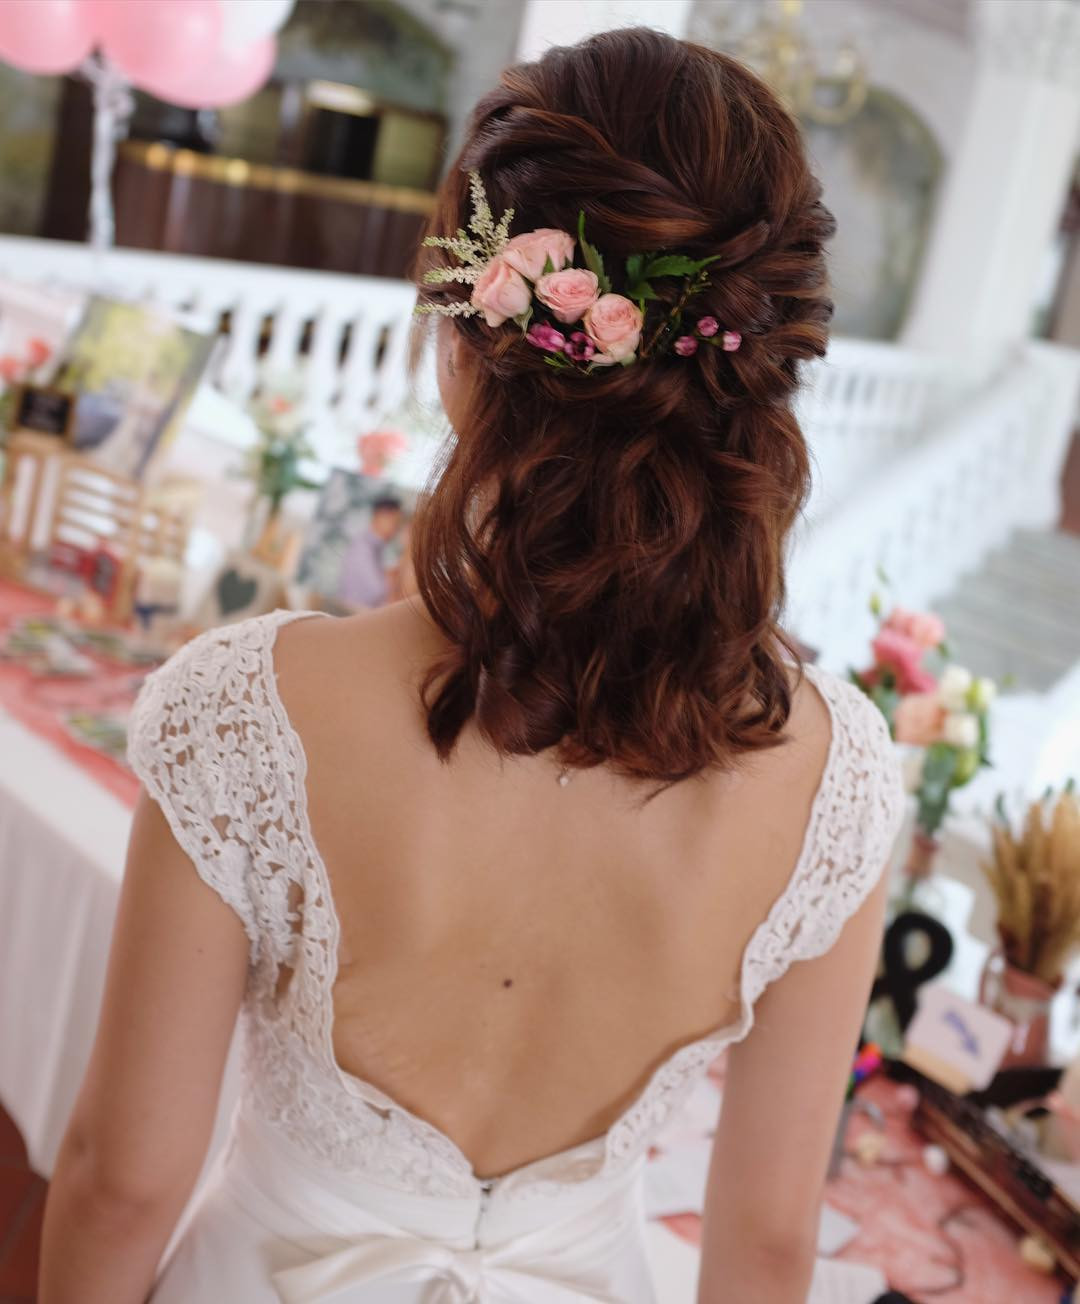 Short Hairstyles For Weddings For Bridesmaids
 30 Beach Wedding Hairstyles Ideas Designs